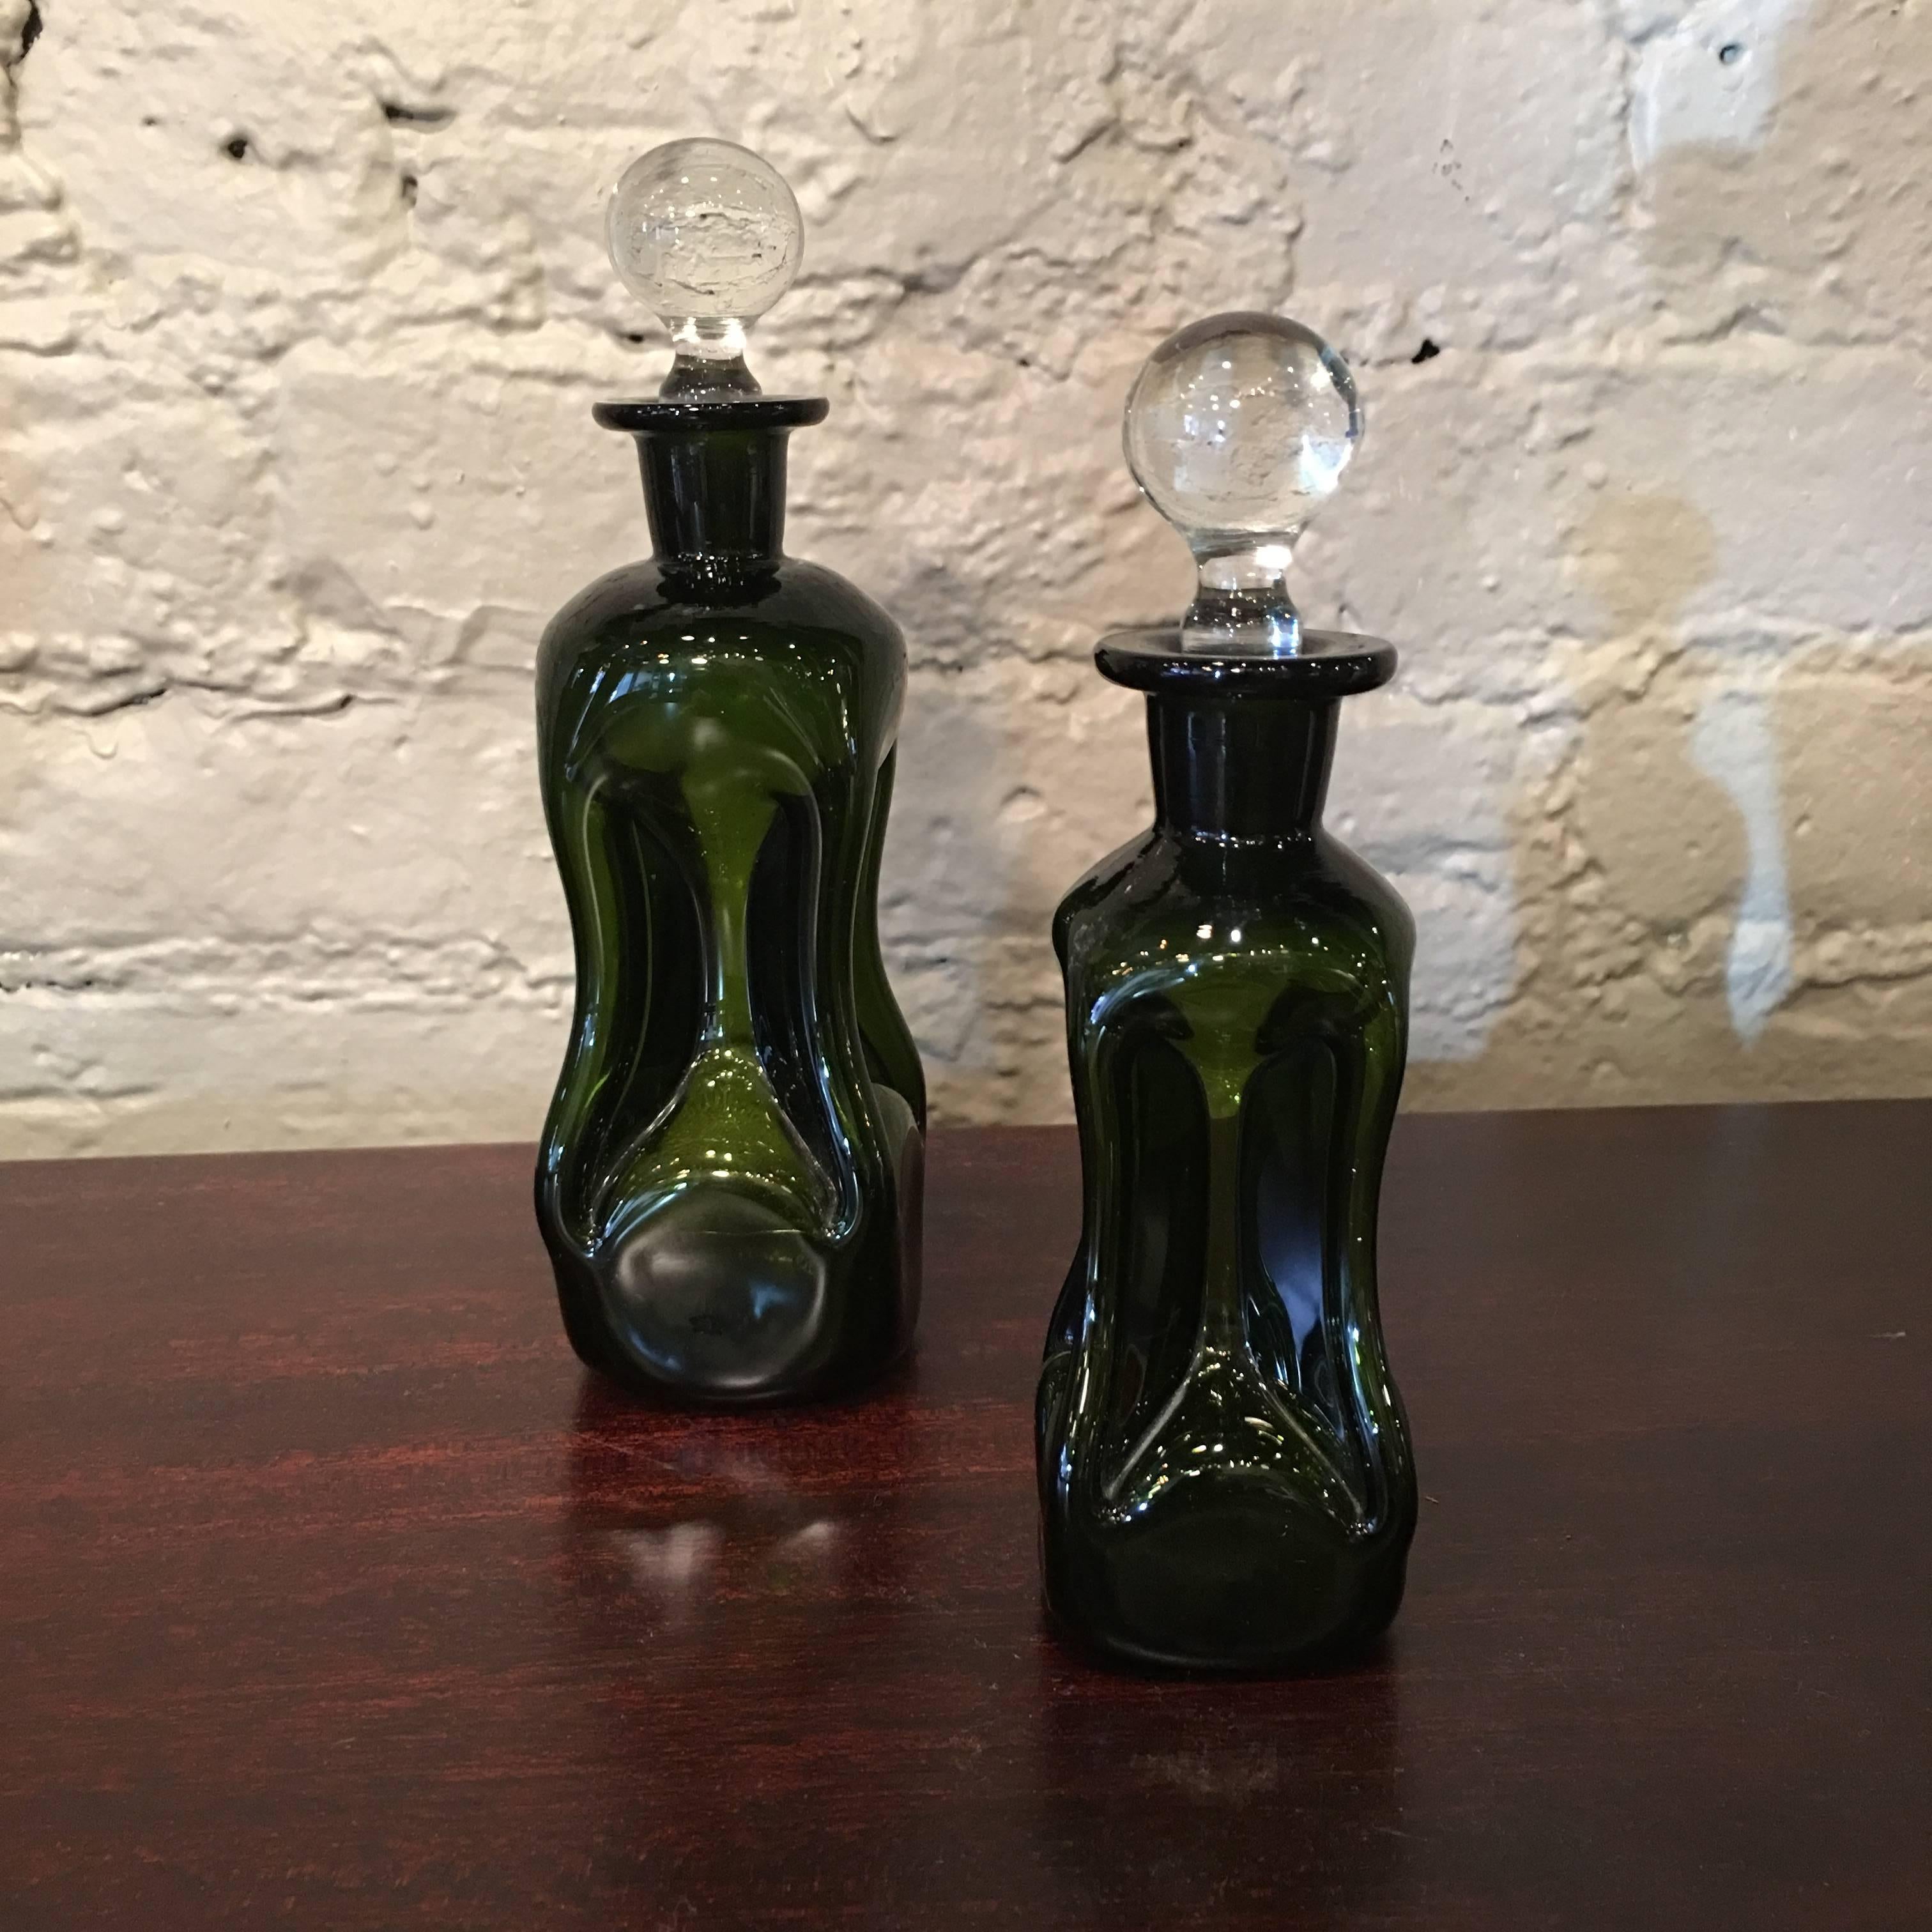 Pair of Mid-Century, dimpled, green glass perfume bottles with clear glass stoppers.

Measures: Large bottle: 2